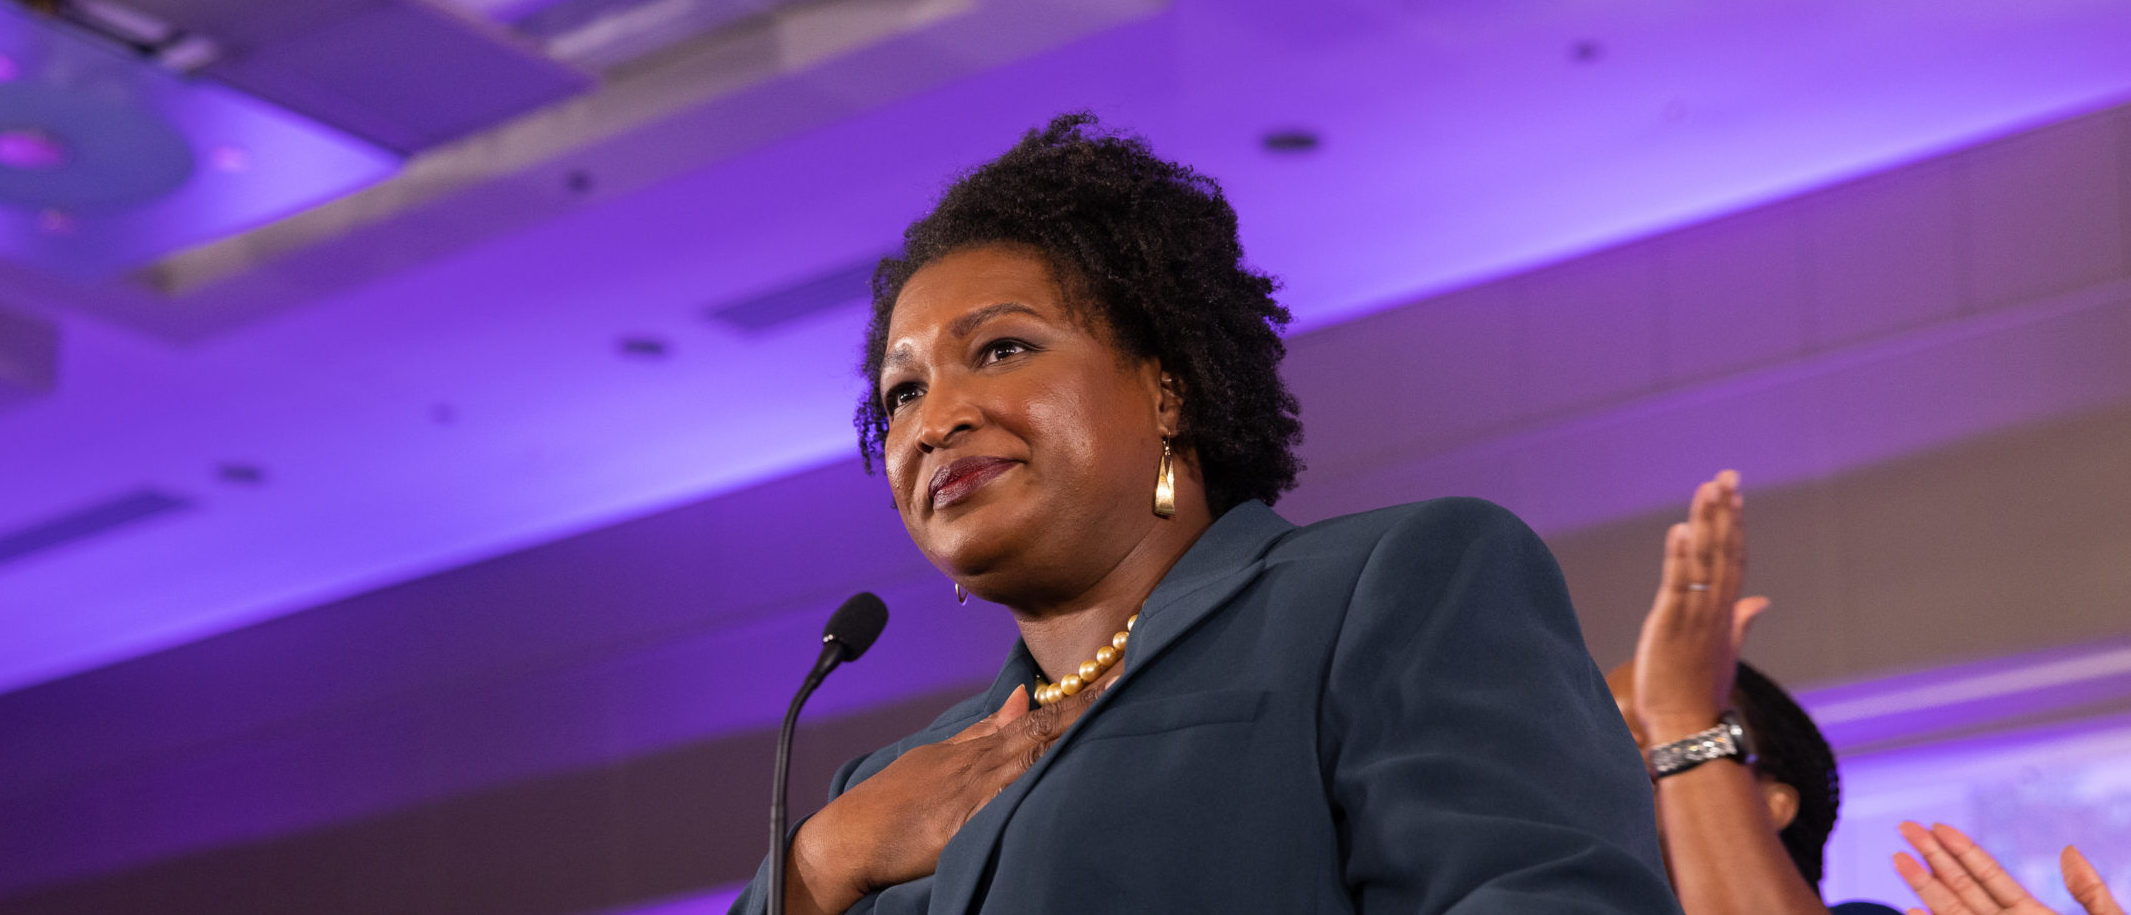 ATLANTA, GA - NOVEMBER 08: Democratic gubernatorial candidate Stacey Abrams makes a concession speech to supporters at an election-night party on November 8, 2022 in Atlanta, Georgia. Abrams lost in her bid for governor to incumbent Gov. Brian Kemp in a rematch of their 2018 race. (Photo by Jessica McGowan/Getty Images)